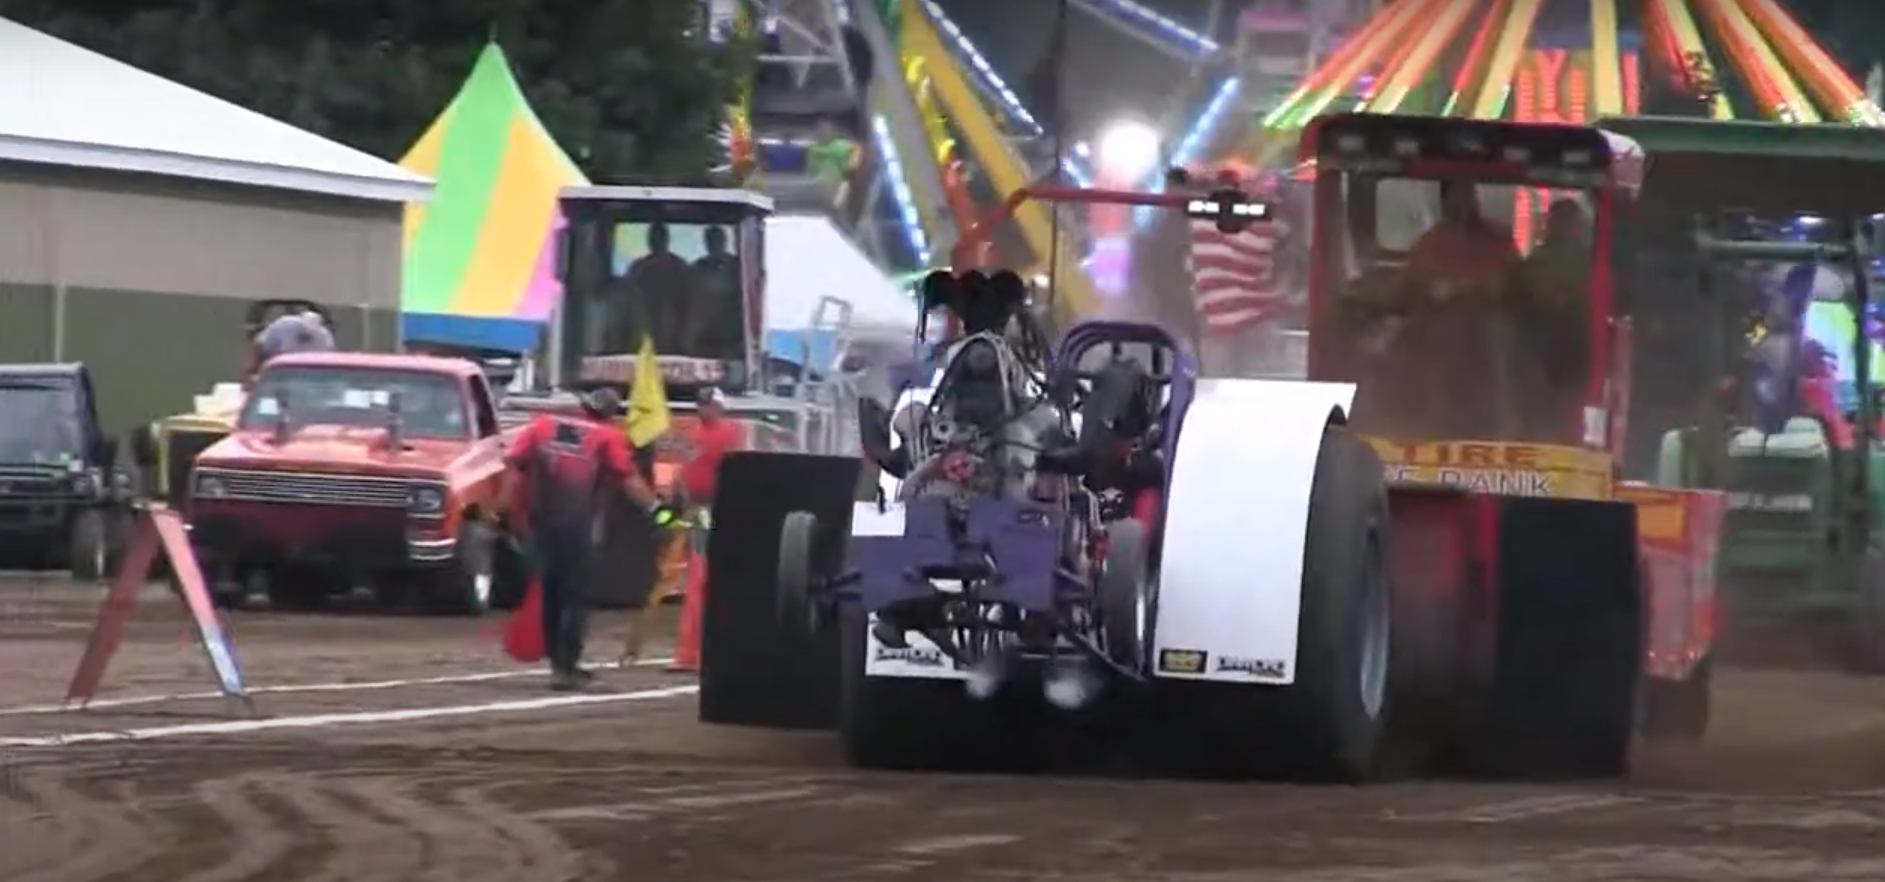 Friday – Tractor Pulling (Two Tracks!) presented by Tri-County Equipment and Flynn’s Tree Services